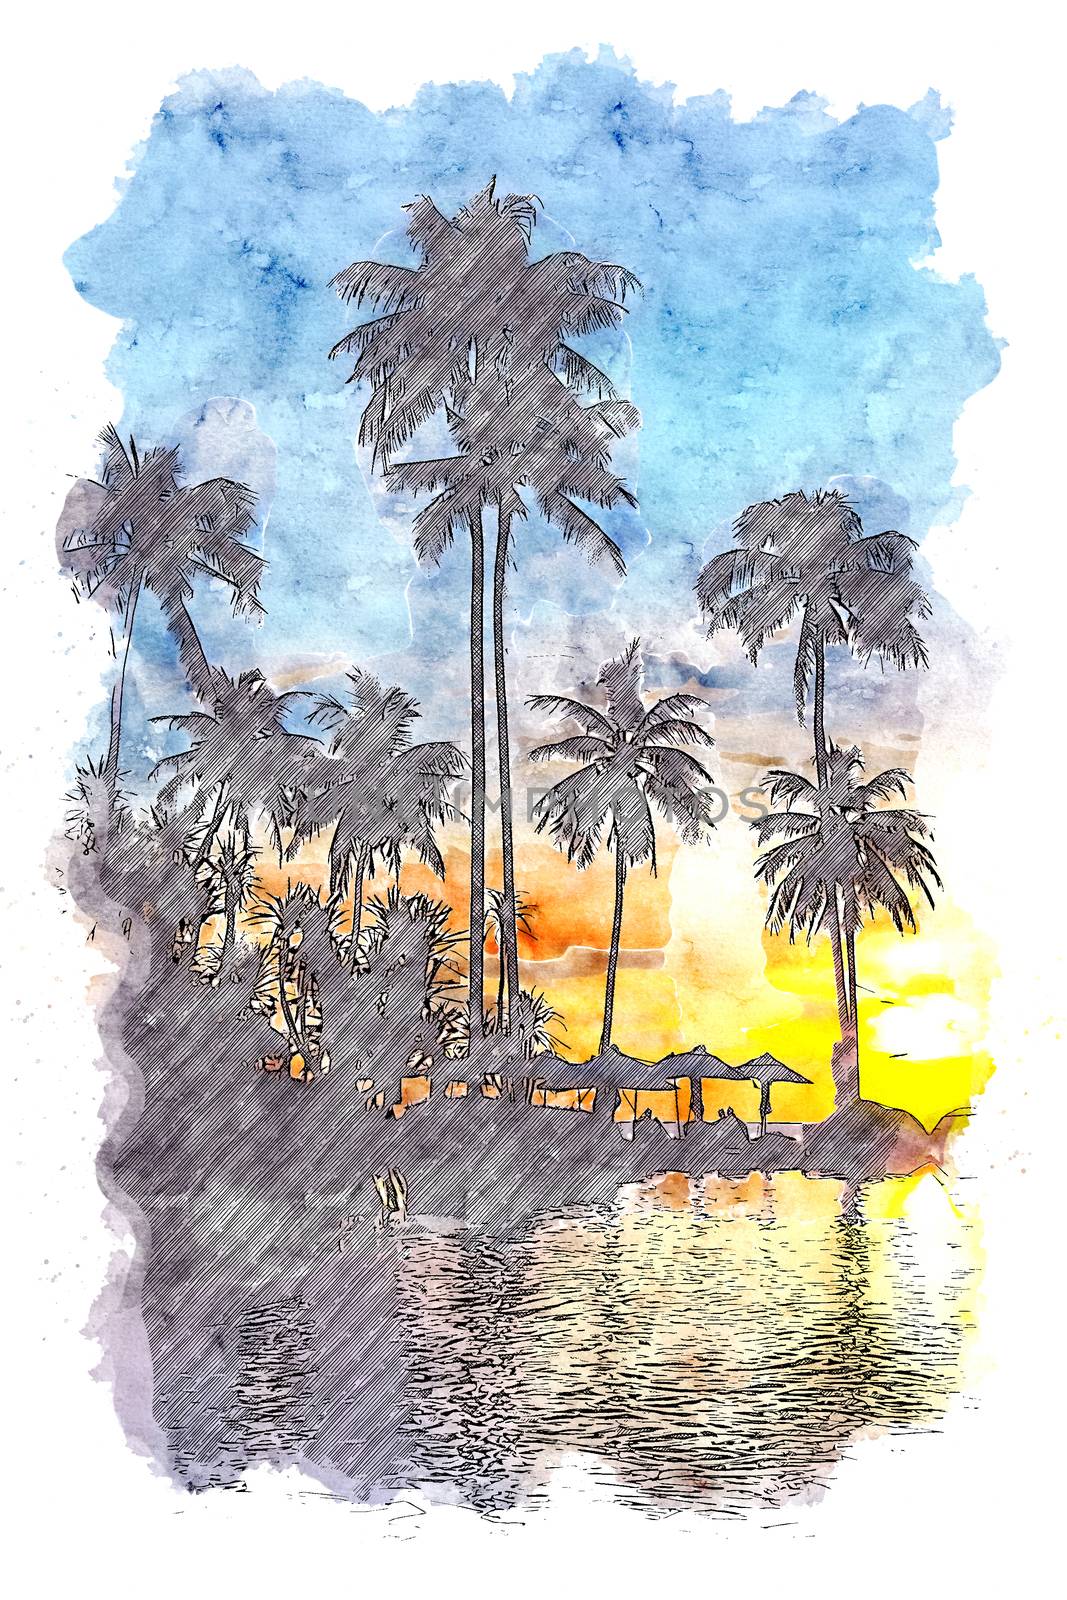 watercolor and illustration of Sunset at tropical beach resort by pkproject